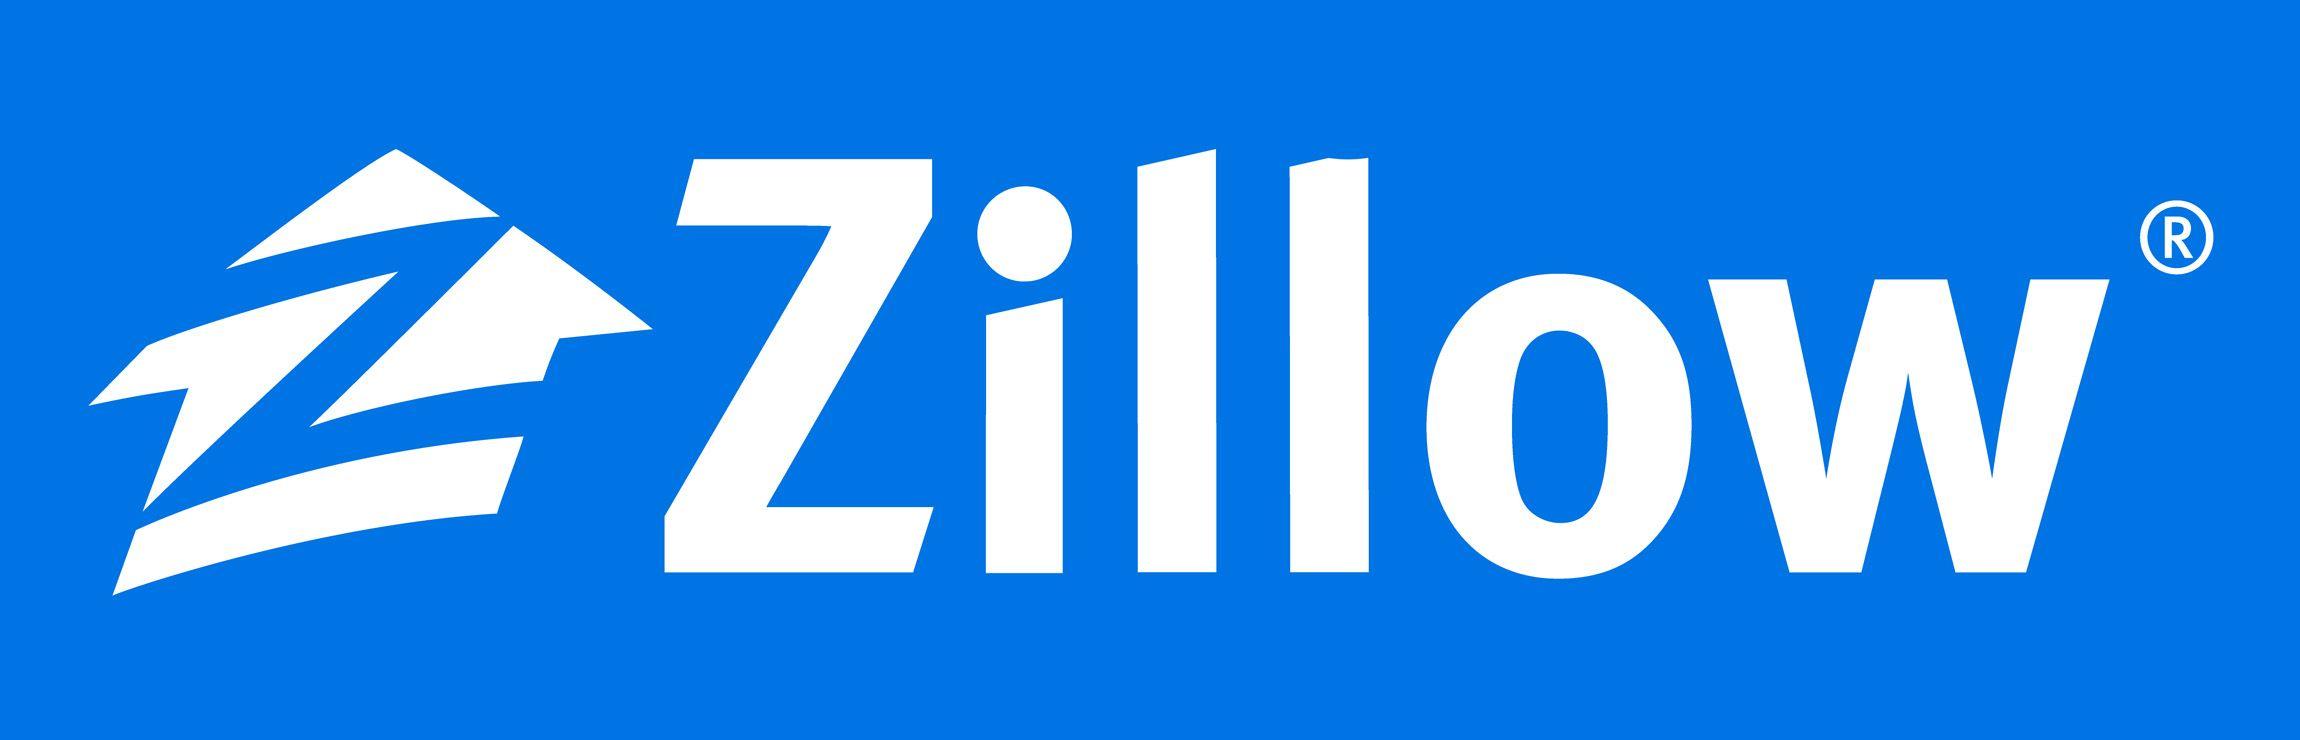 Zillow Premier Logo - Zillow Logo, Zillow Symbol, Meaning, History and Evolution